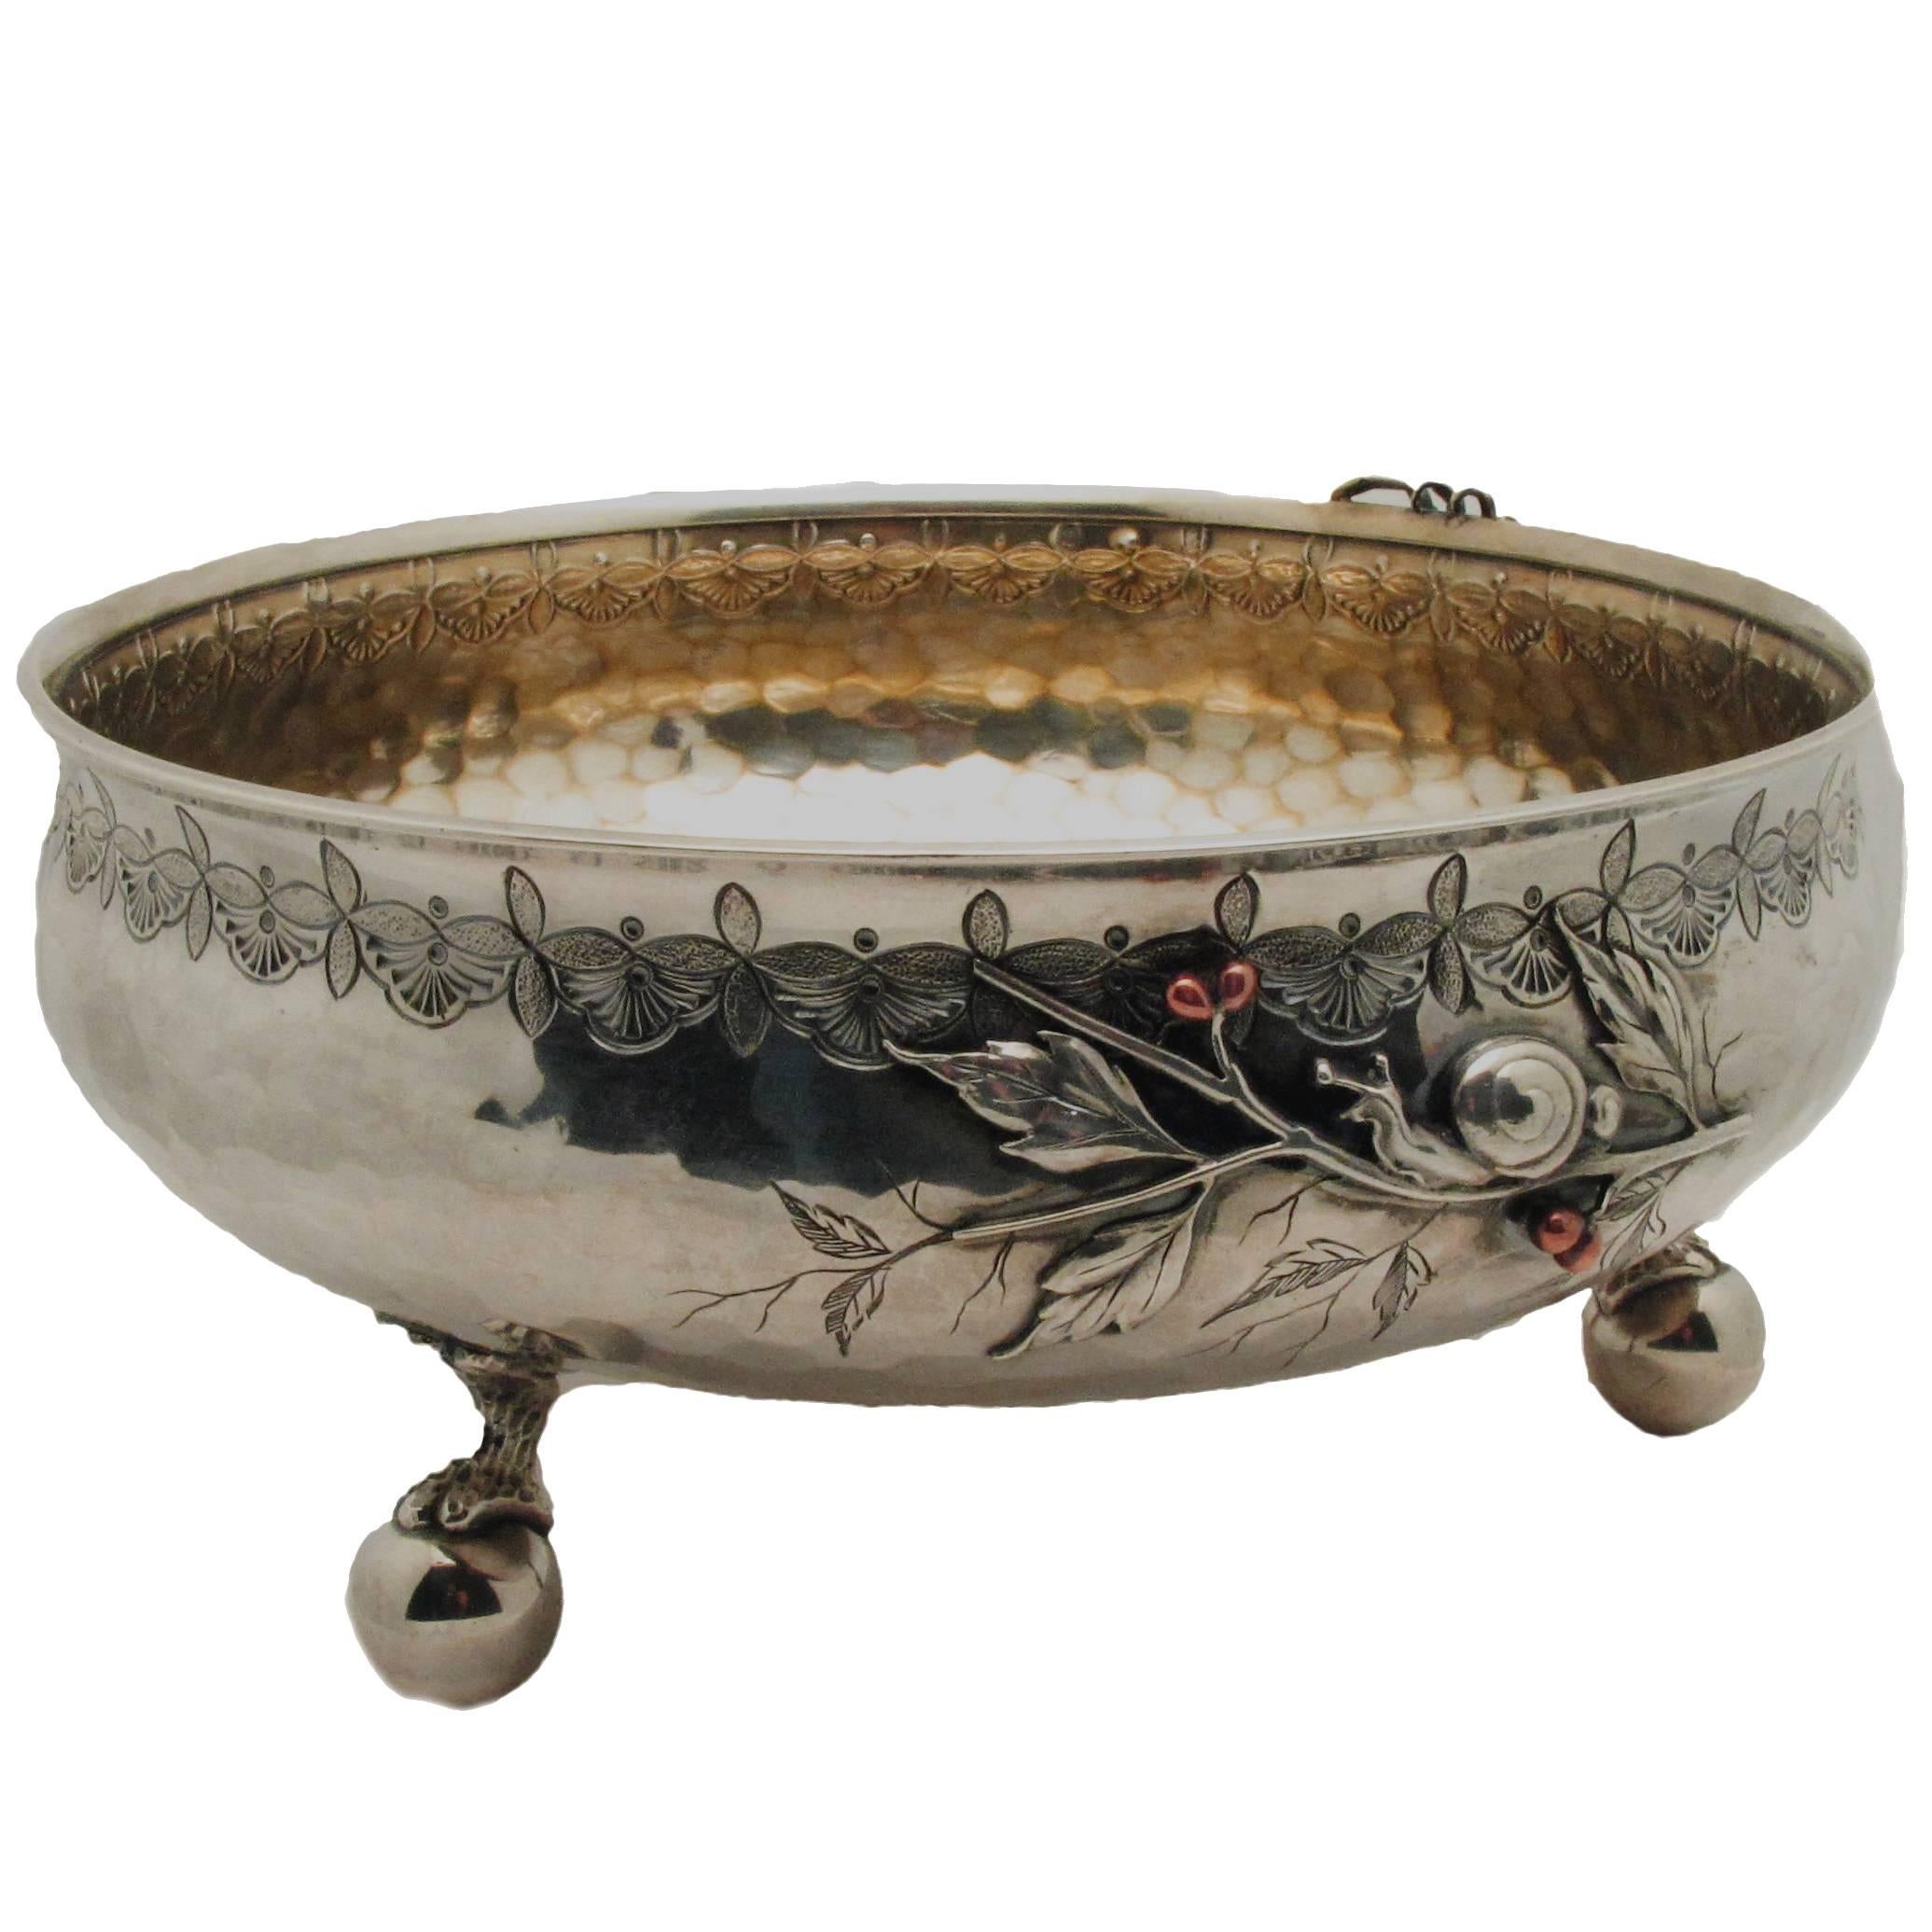 19th Century Whiting Japanese Inspired Silver Footed Bowl